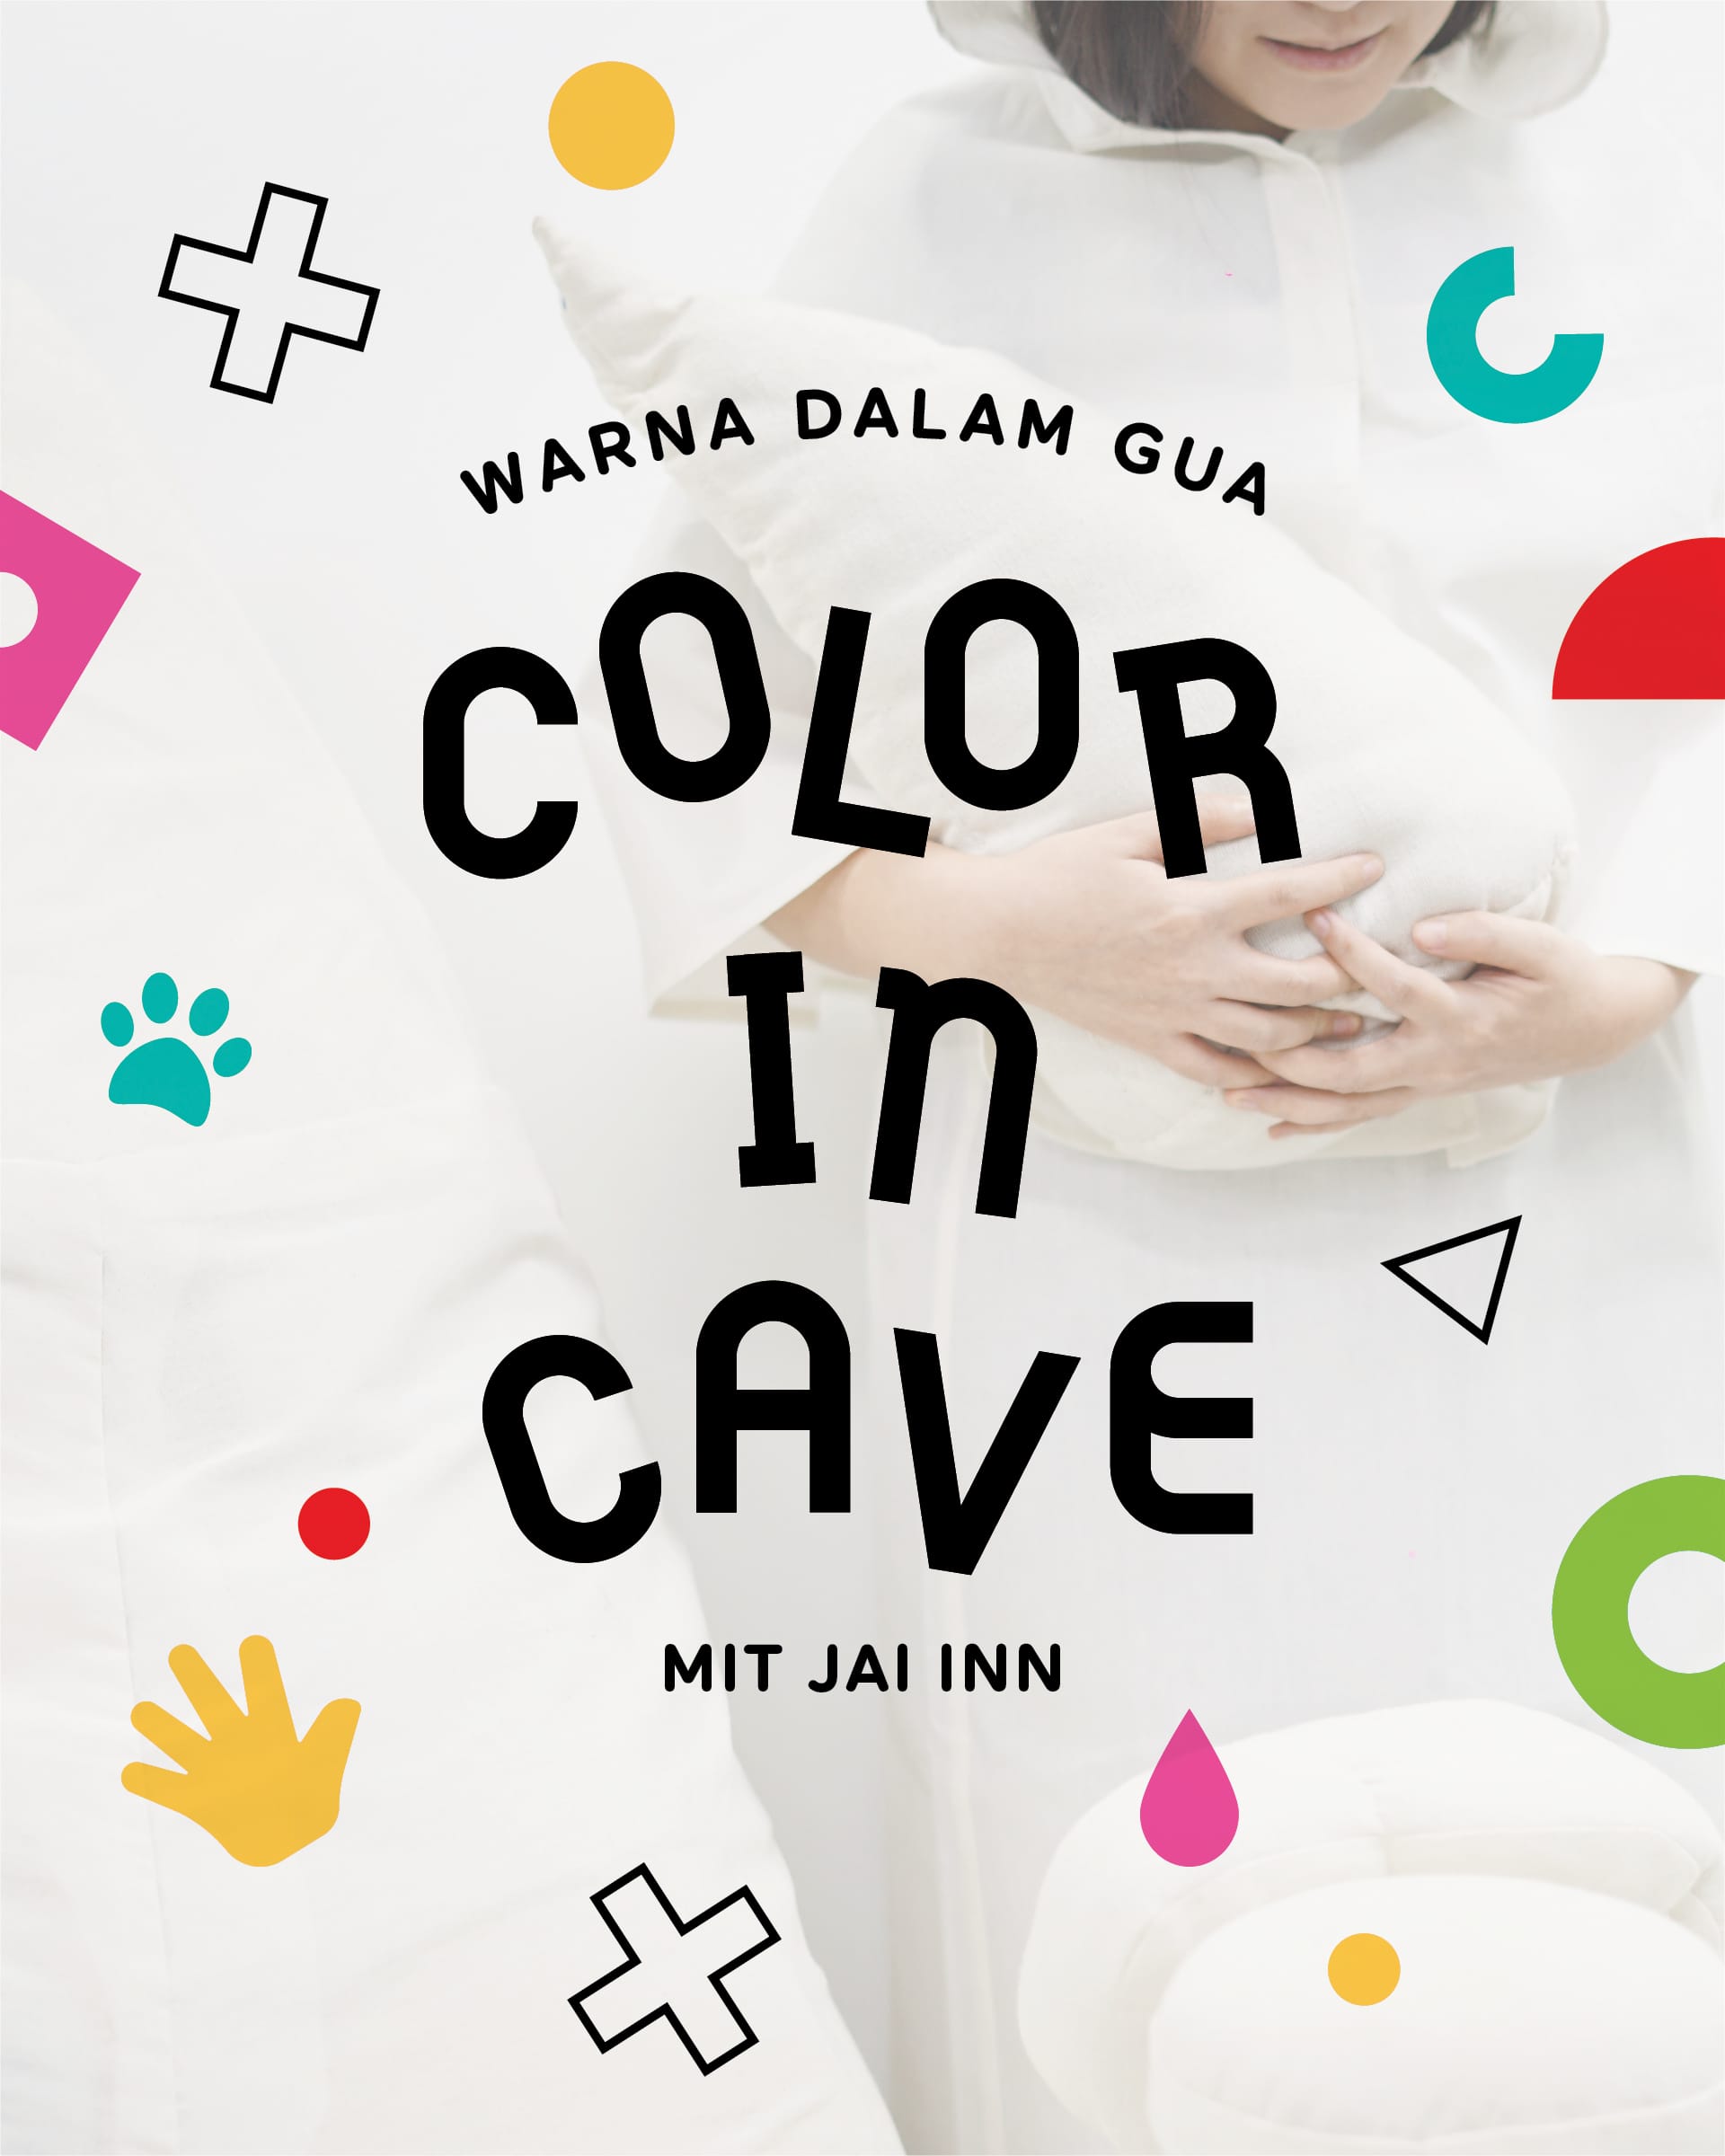 Children's Art Space Color in Cave by Mit Jai Inn  Thank you for reading! Read many other interestin